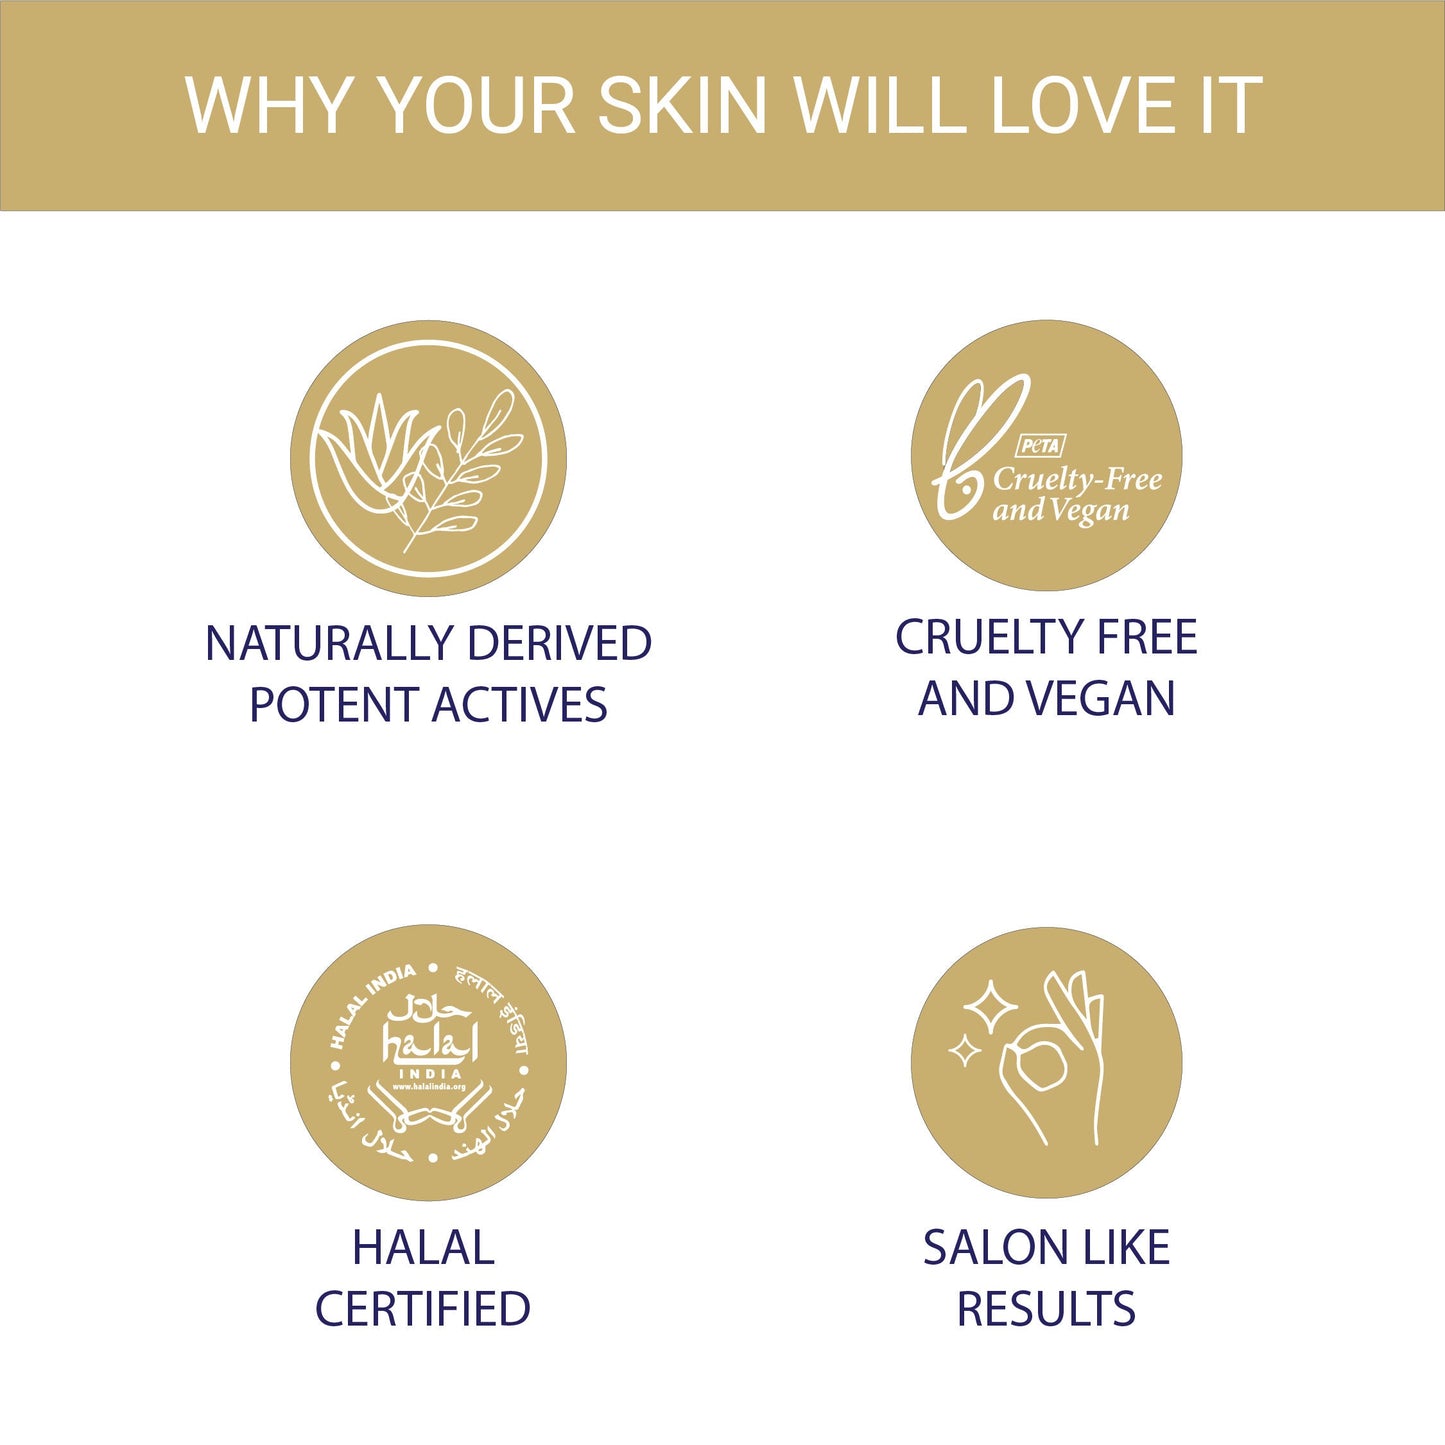 Why Your Skin Will Love It